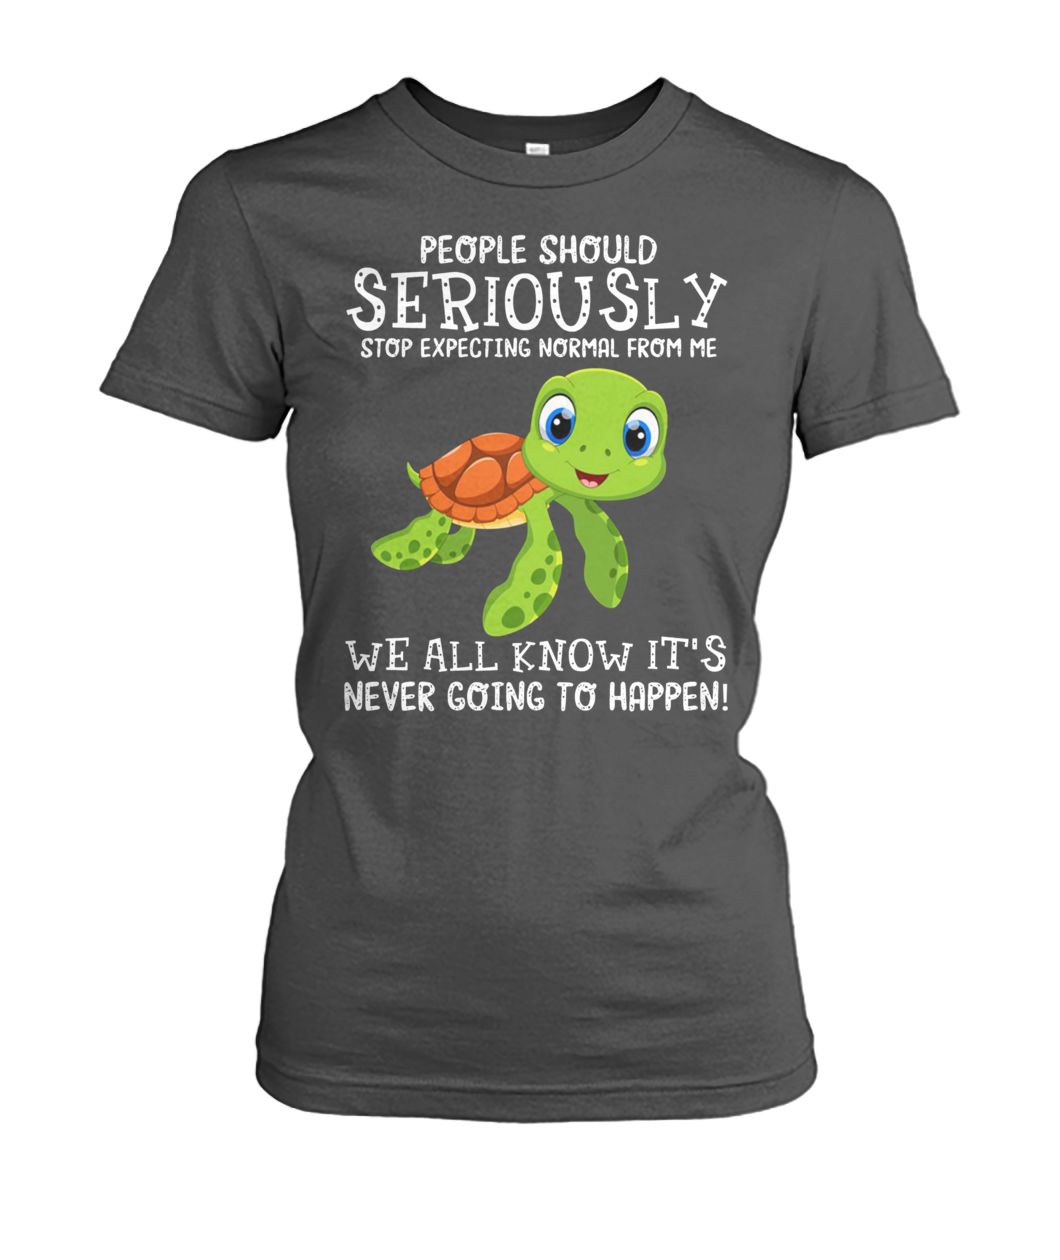 People should seriously stop expecting normal from me baby turtle women's crew tee